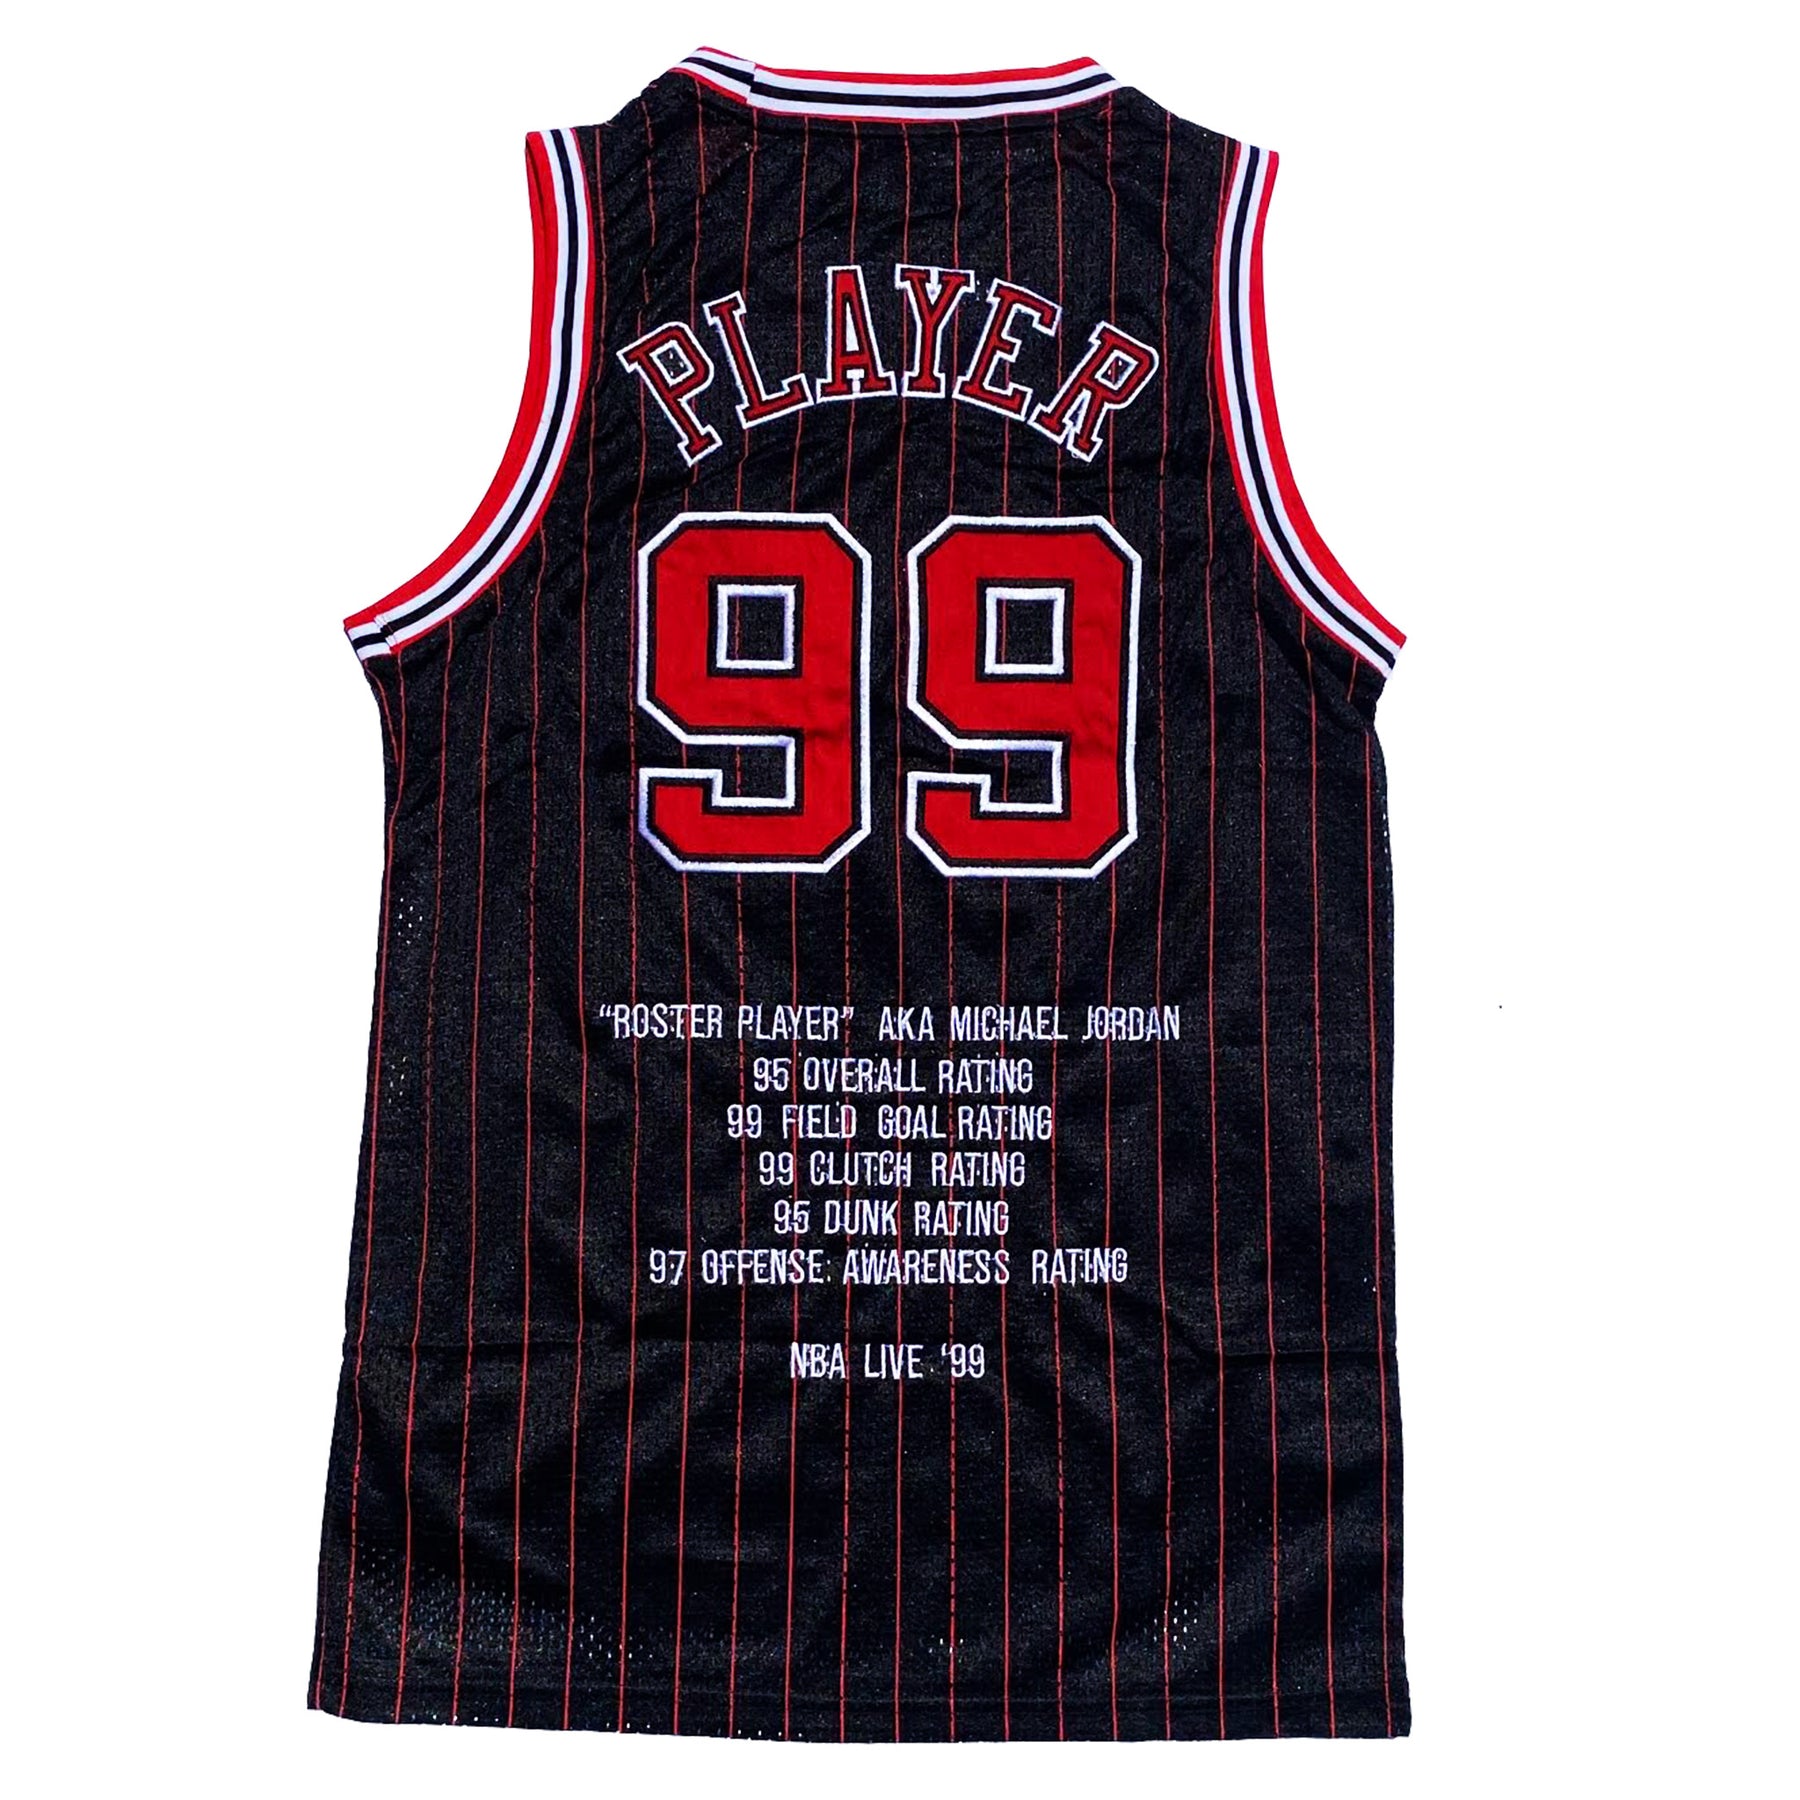 ROSTER PLAYER #99 Jersey – Balcony Life$tyle